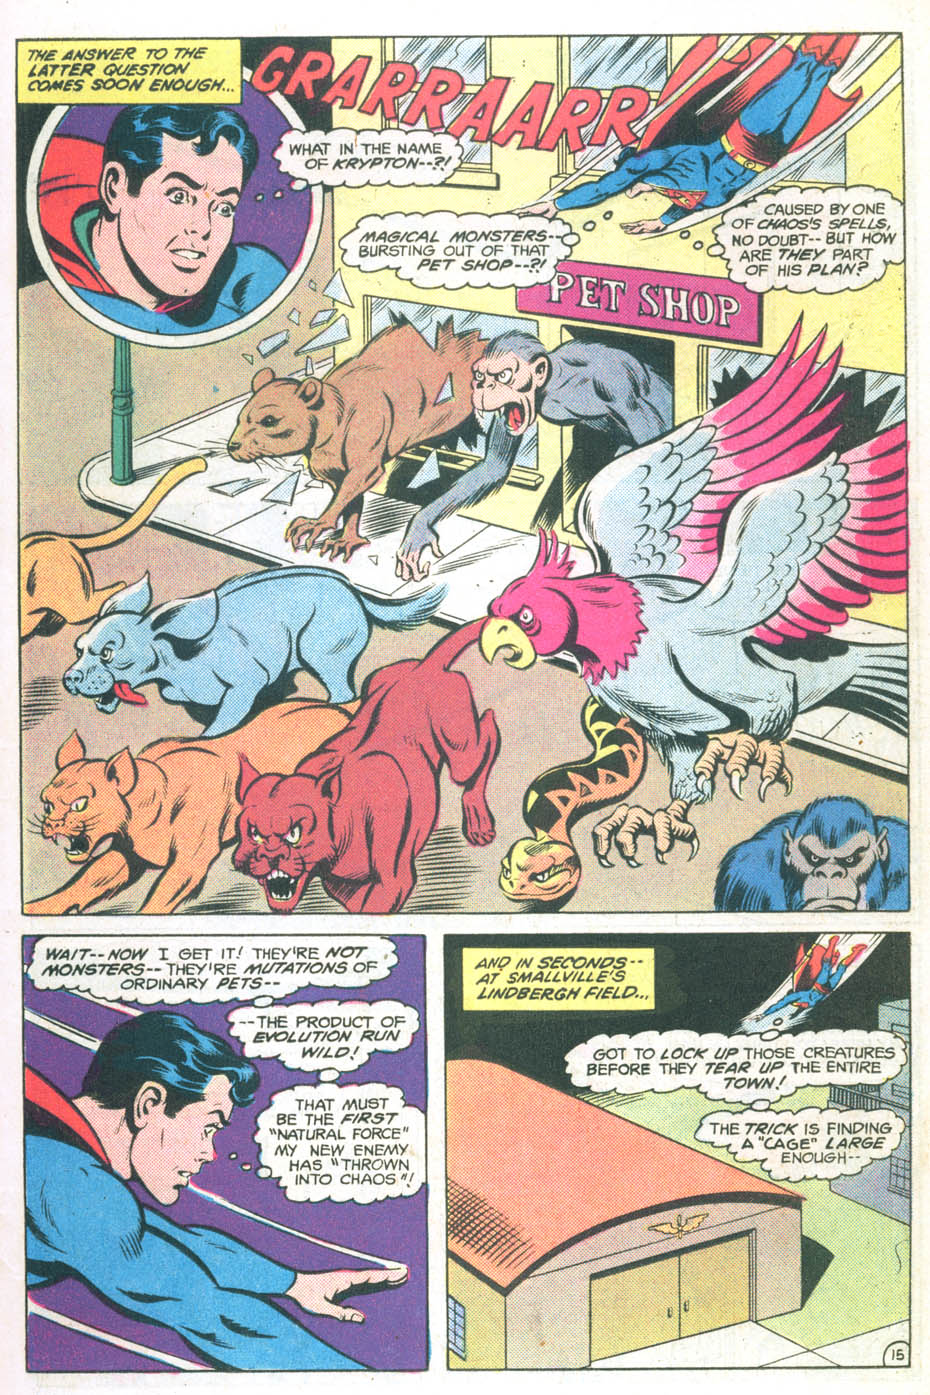 The New Adventures of Superboy 25 Page 15